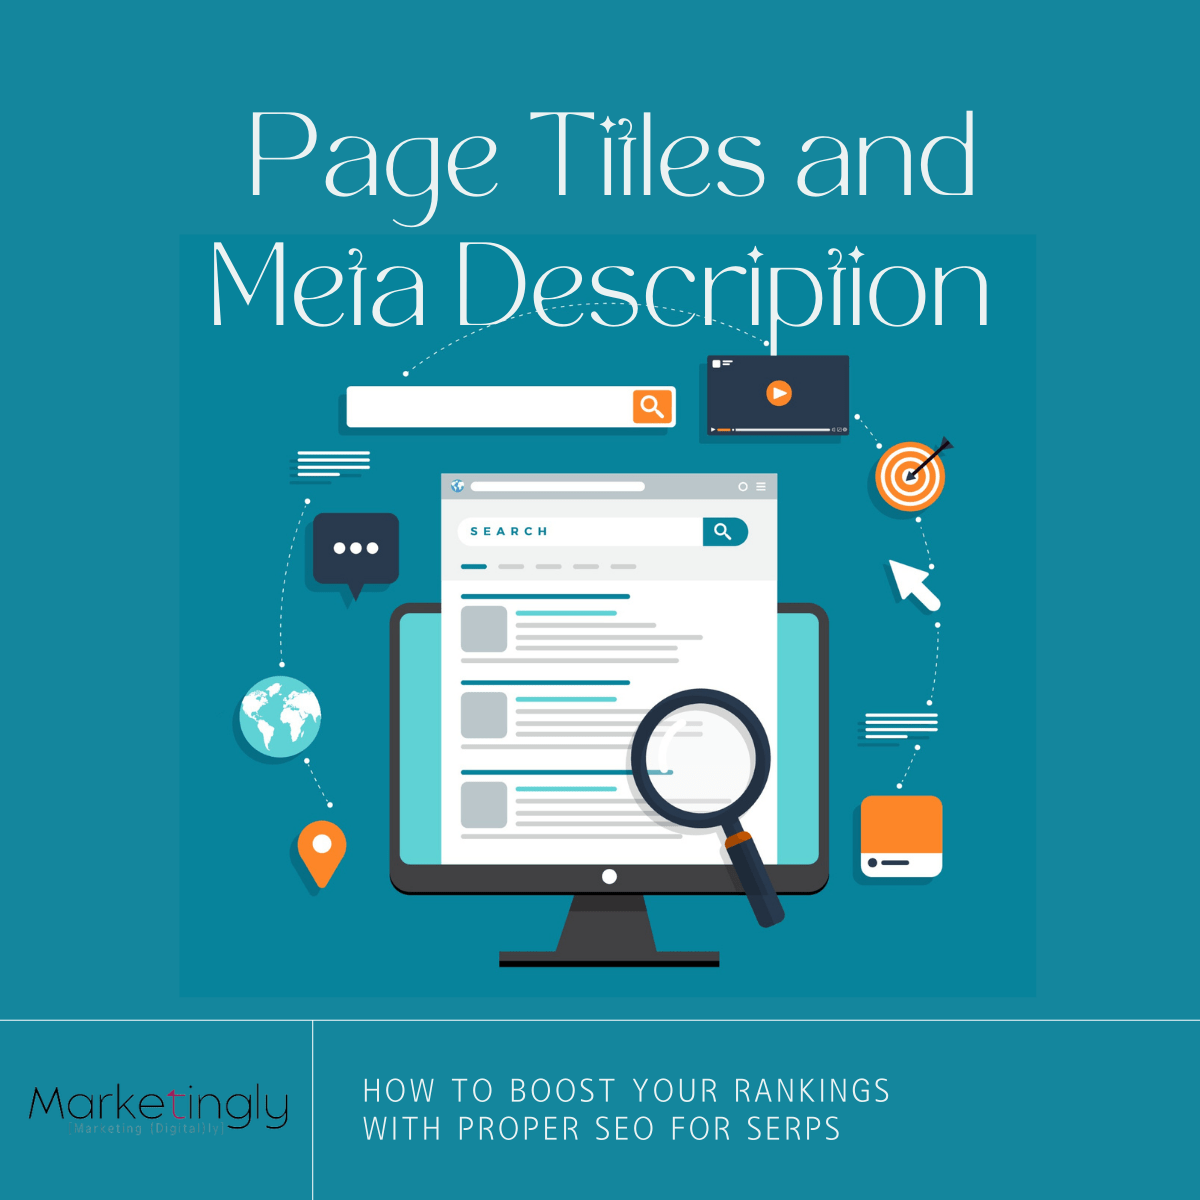 How To Use Page Titles And Meta Descriptions To Boost Rankings